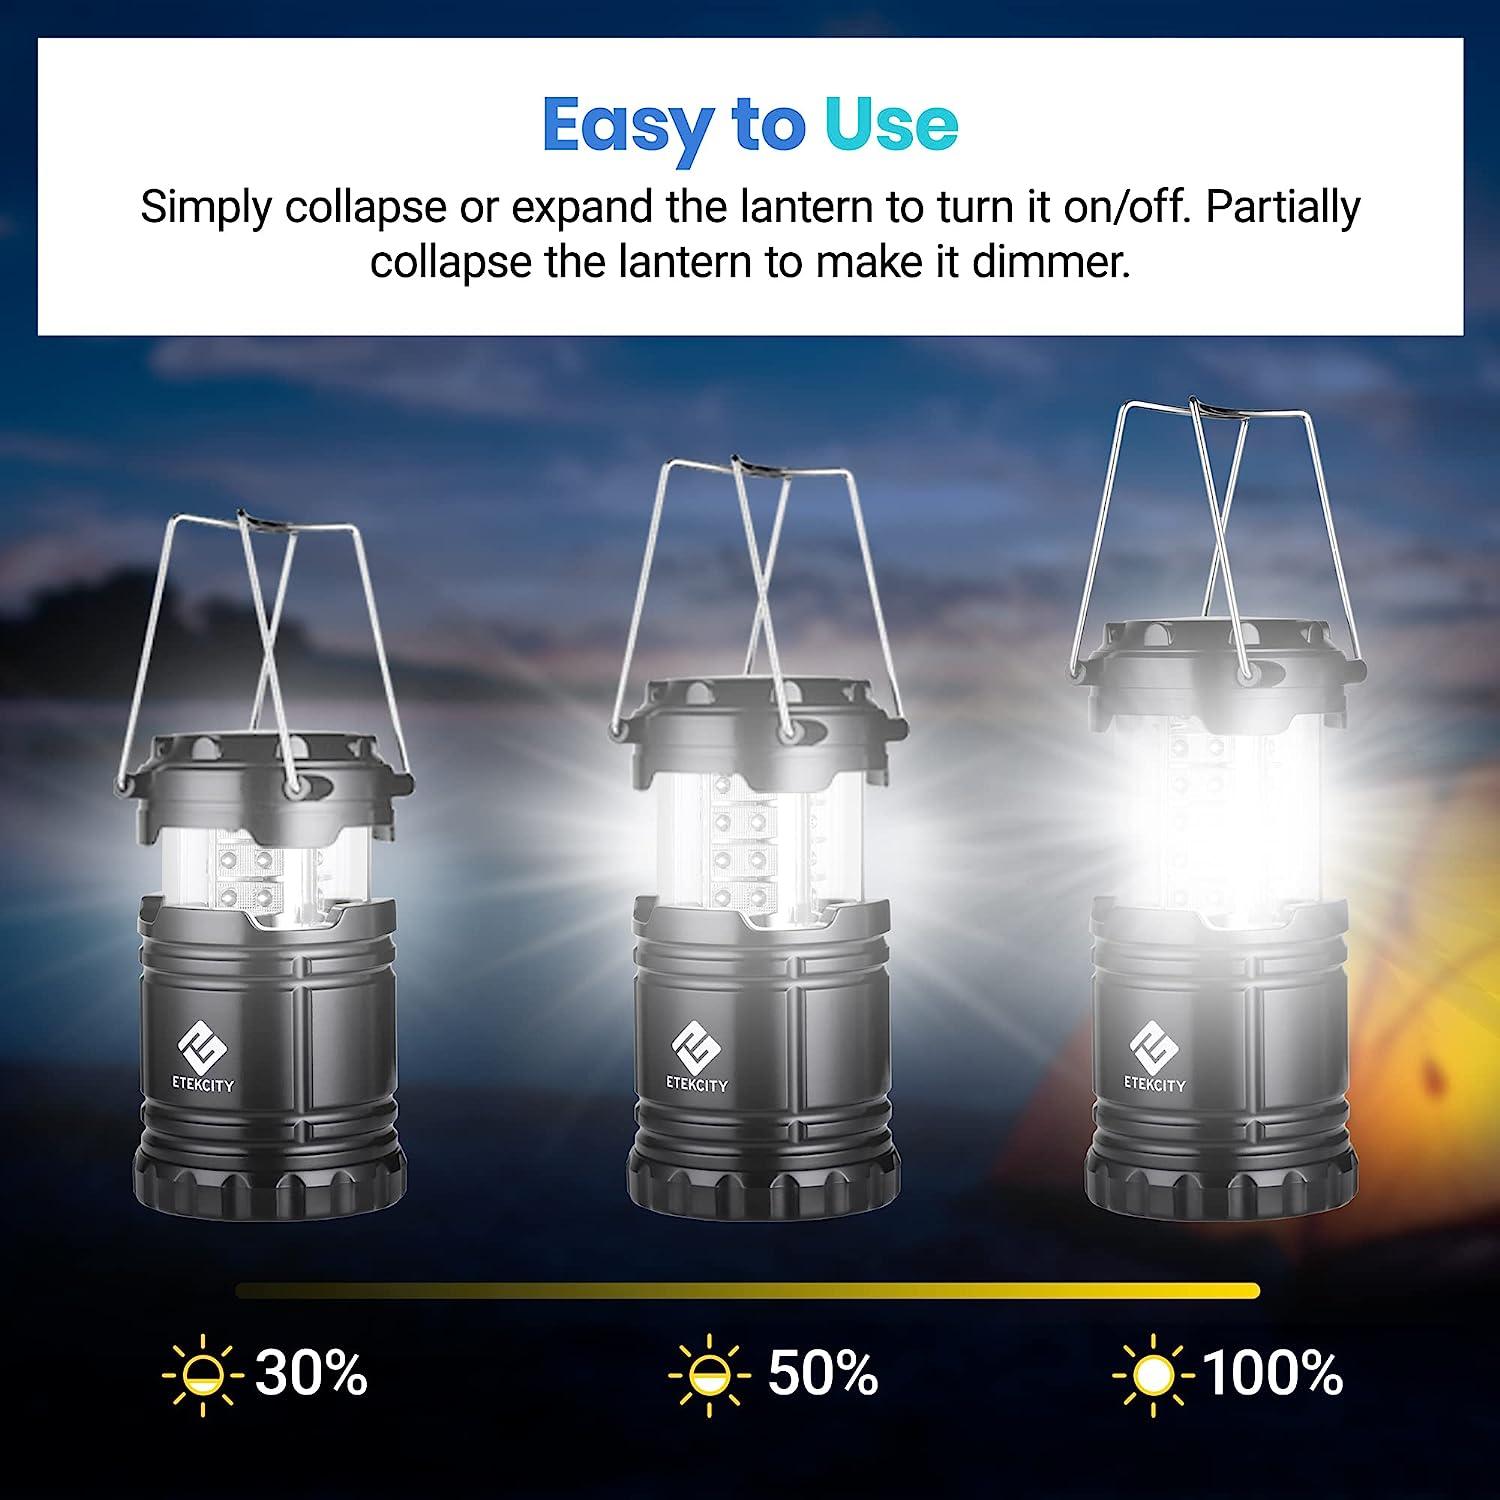 2Pack 360 LED Collapsible Camping Lantern IPX4 Water Resistant Super Bright  Battery Powered - Lanterns, Facebook Marketplace